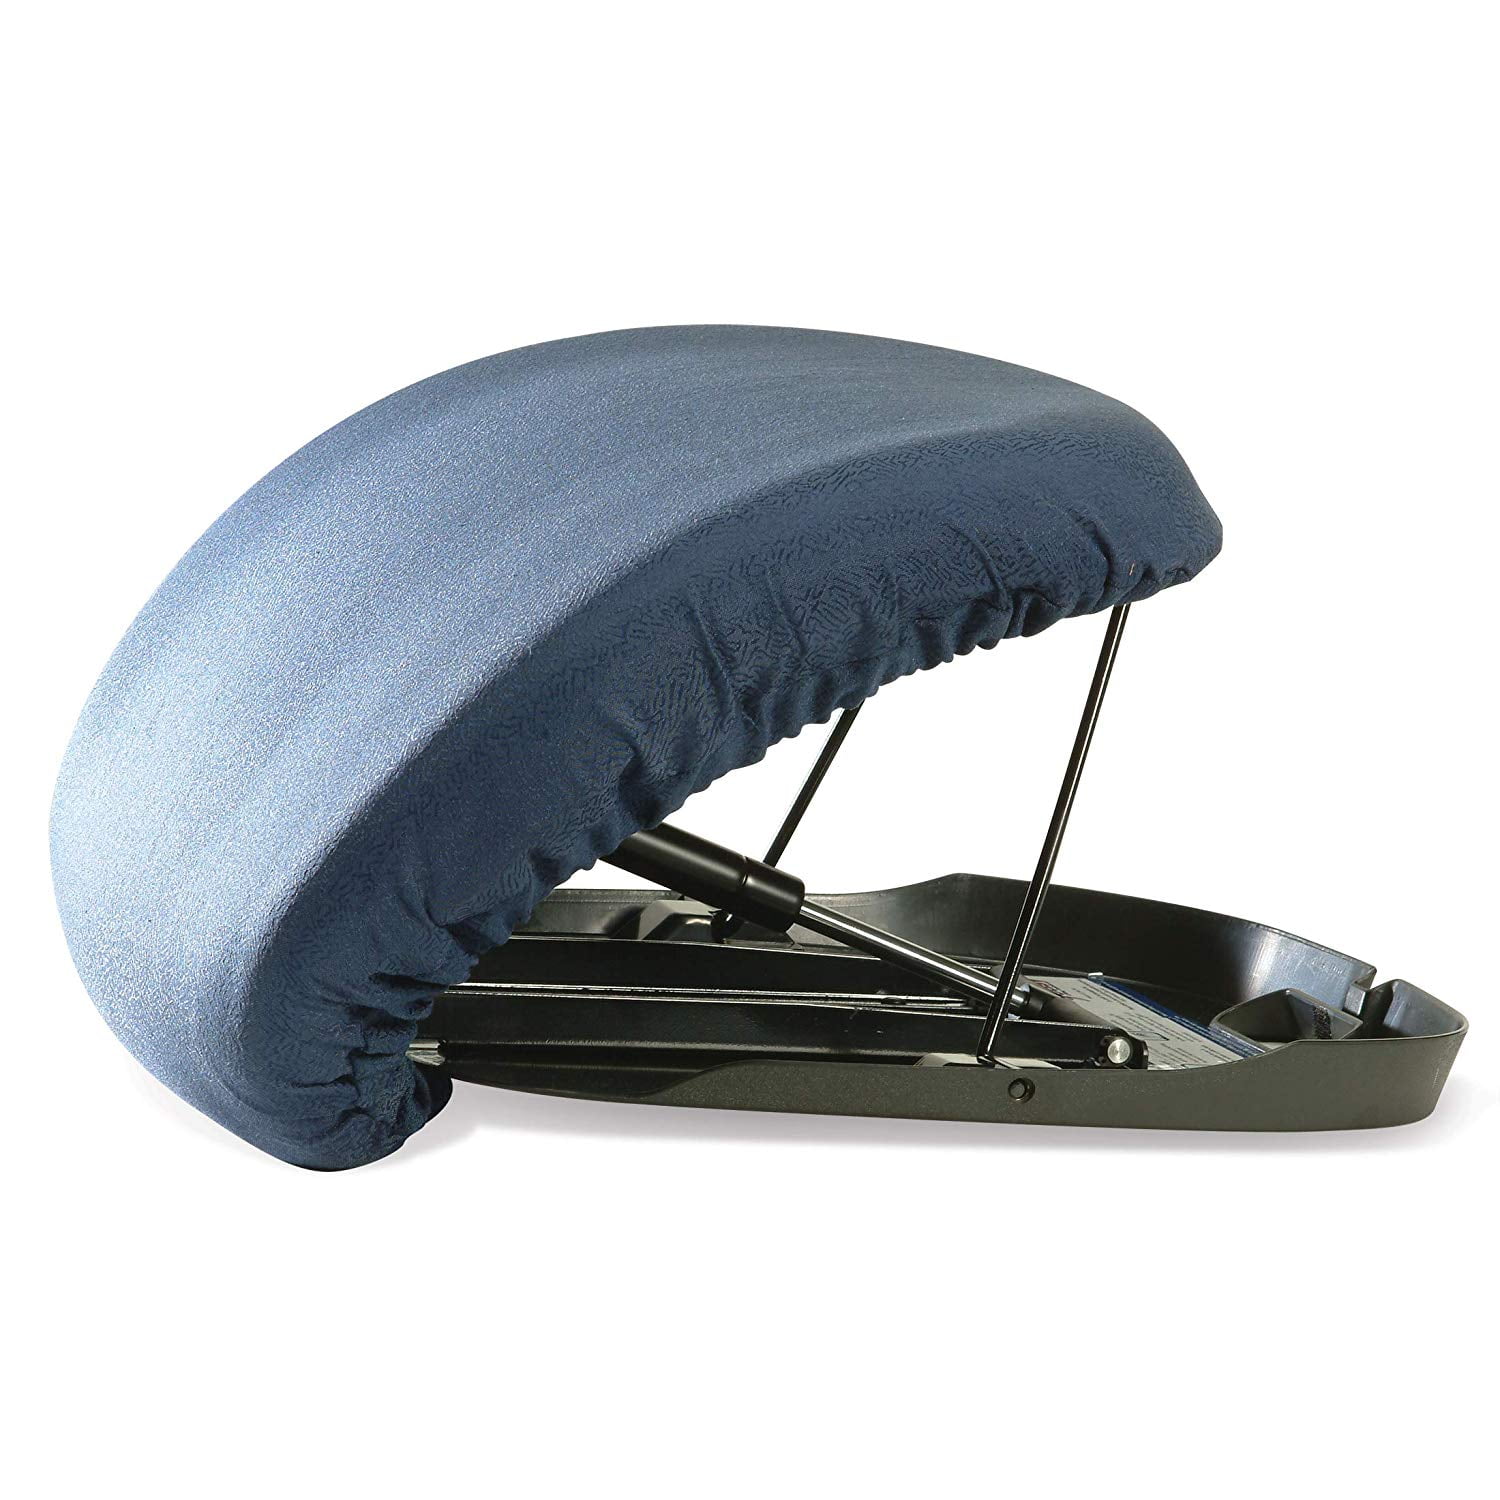 Cushion Easy Up Cushion Lifting Cushion Foldable Lift Seat Assist For  Patient - AliExpress